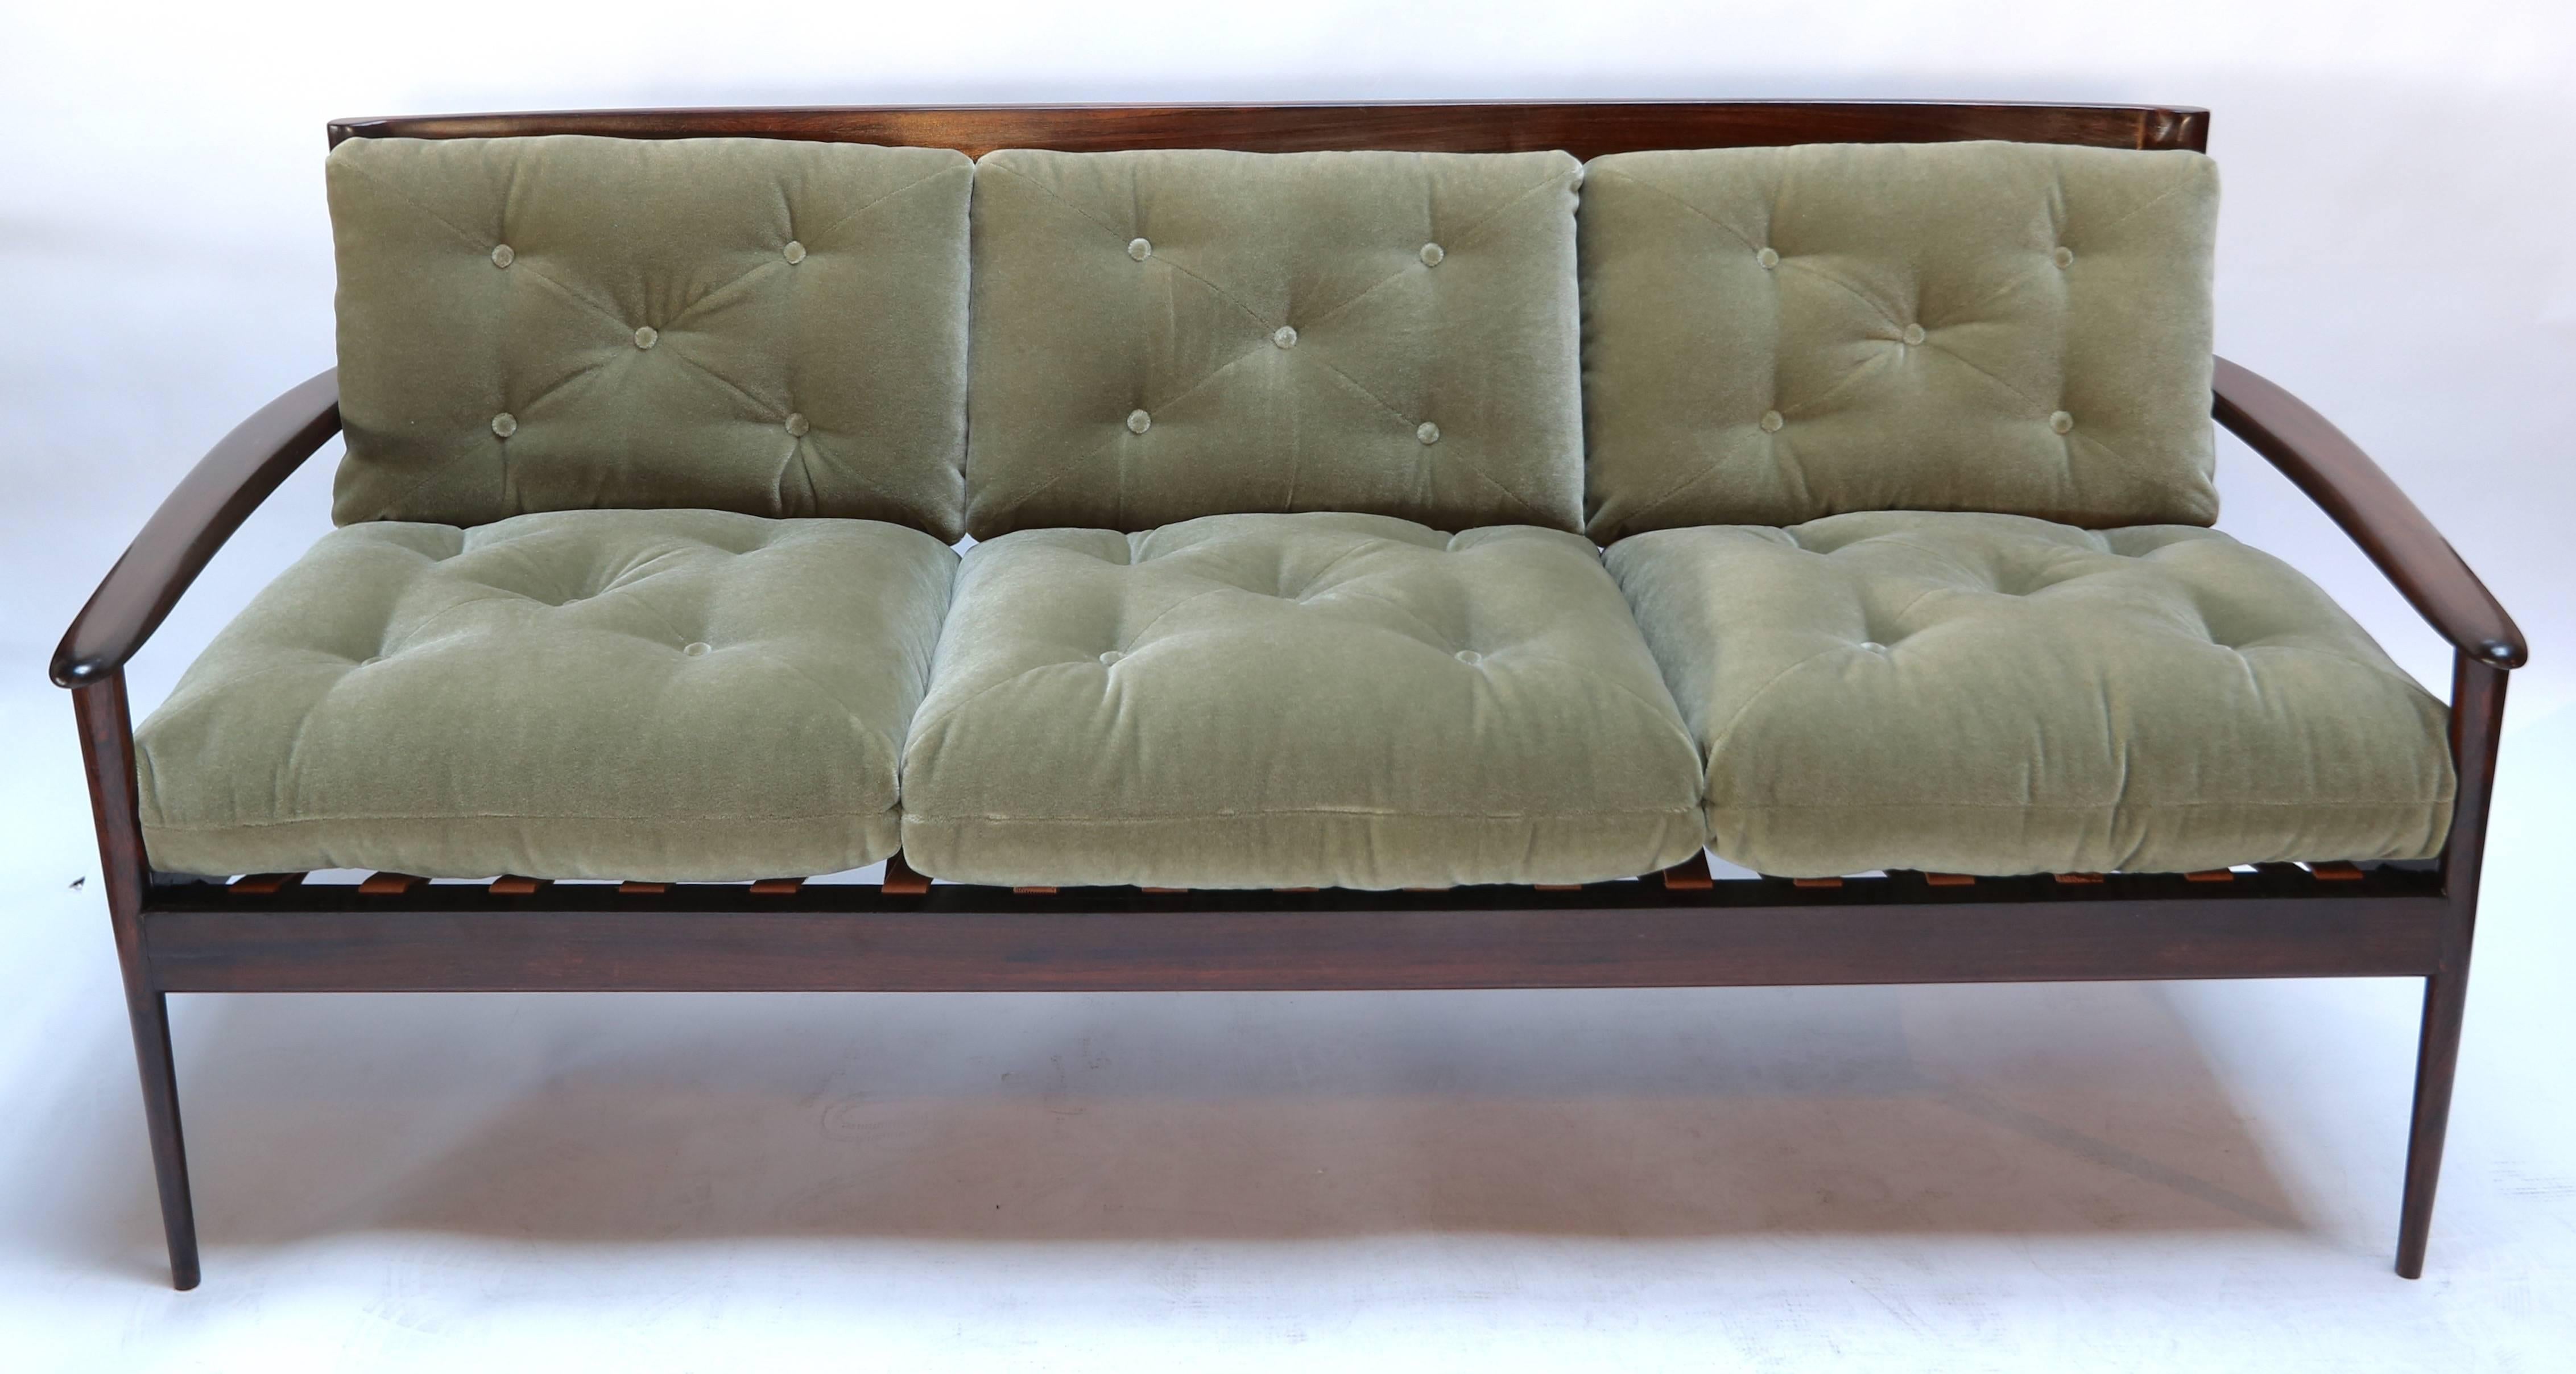 Brazilian jacaranda wood 1960s three-seat sofa by Rino Levi upholstered in green mohair.

A pair of matching armchairs (LU81754799563) is also available.